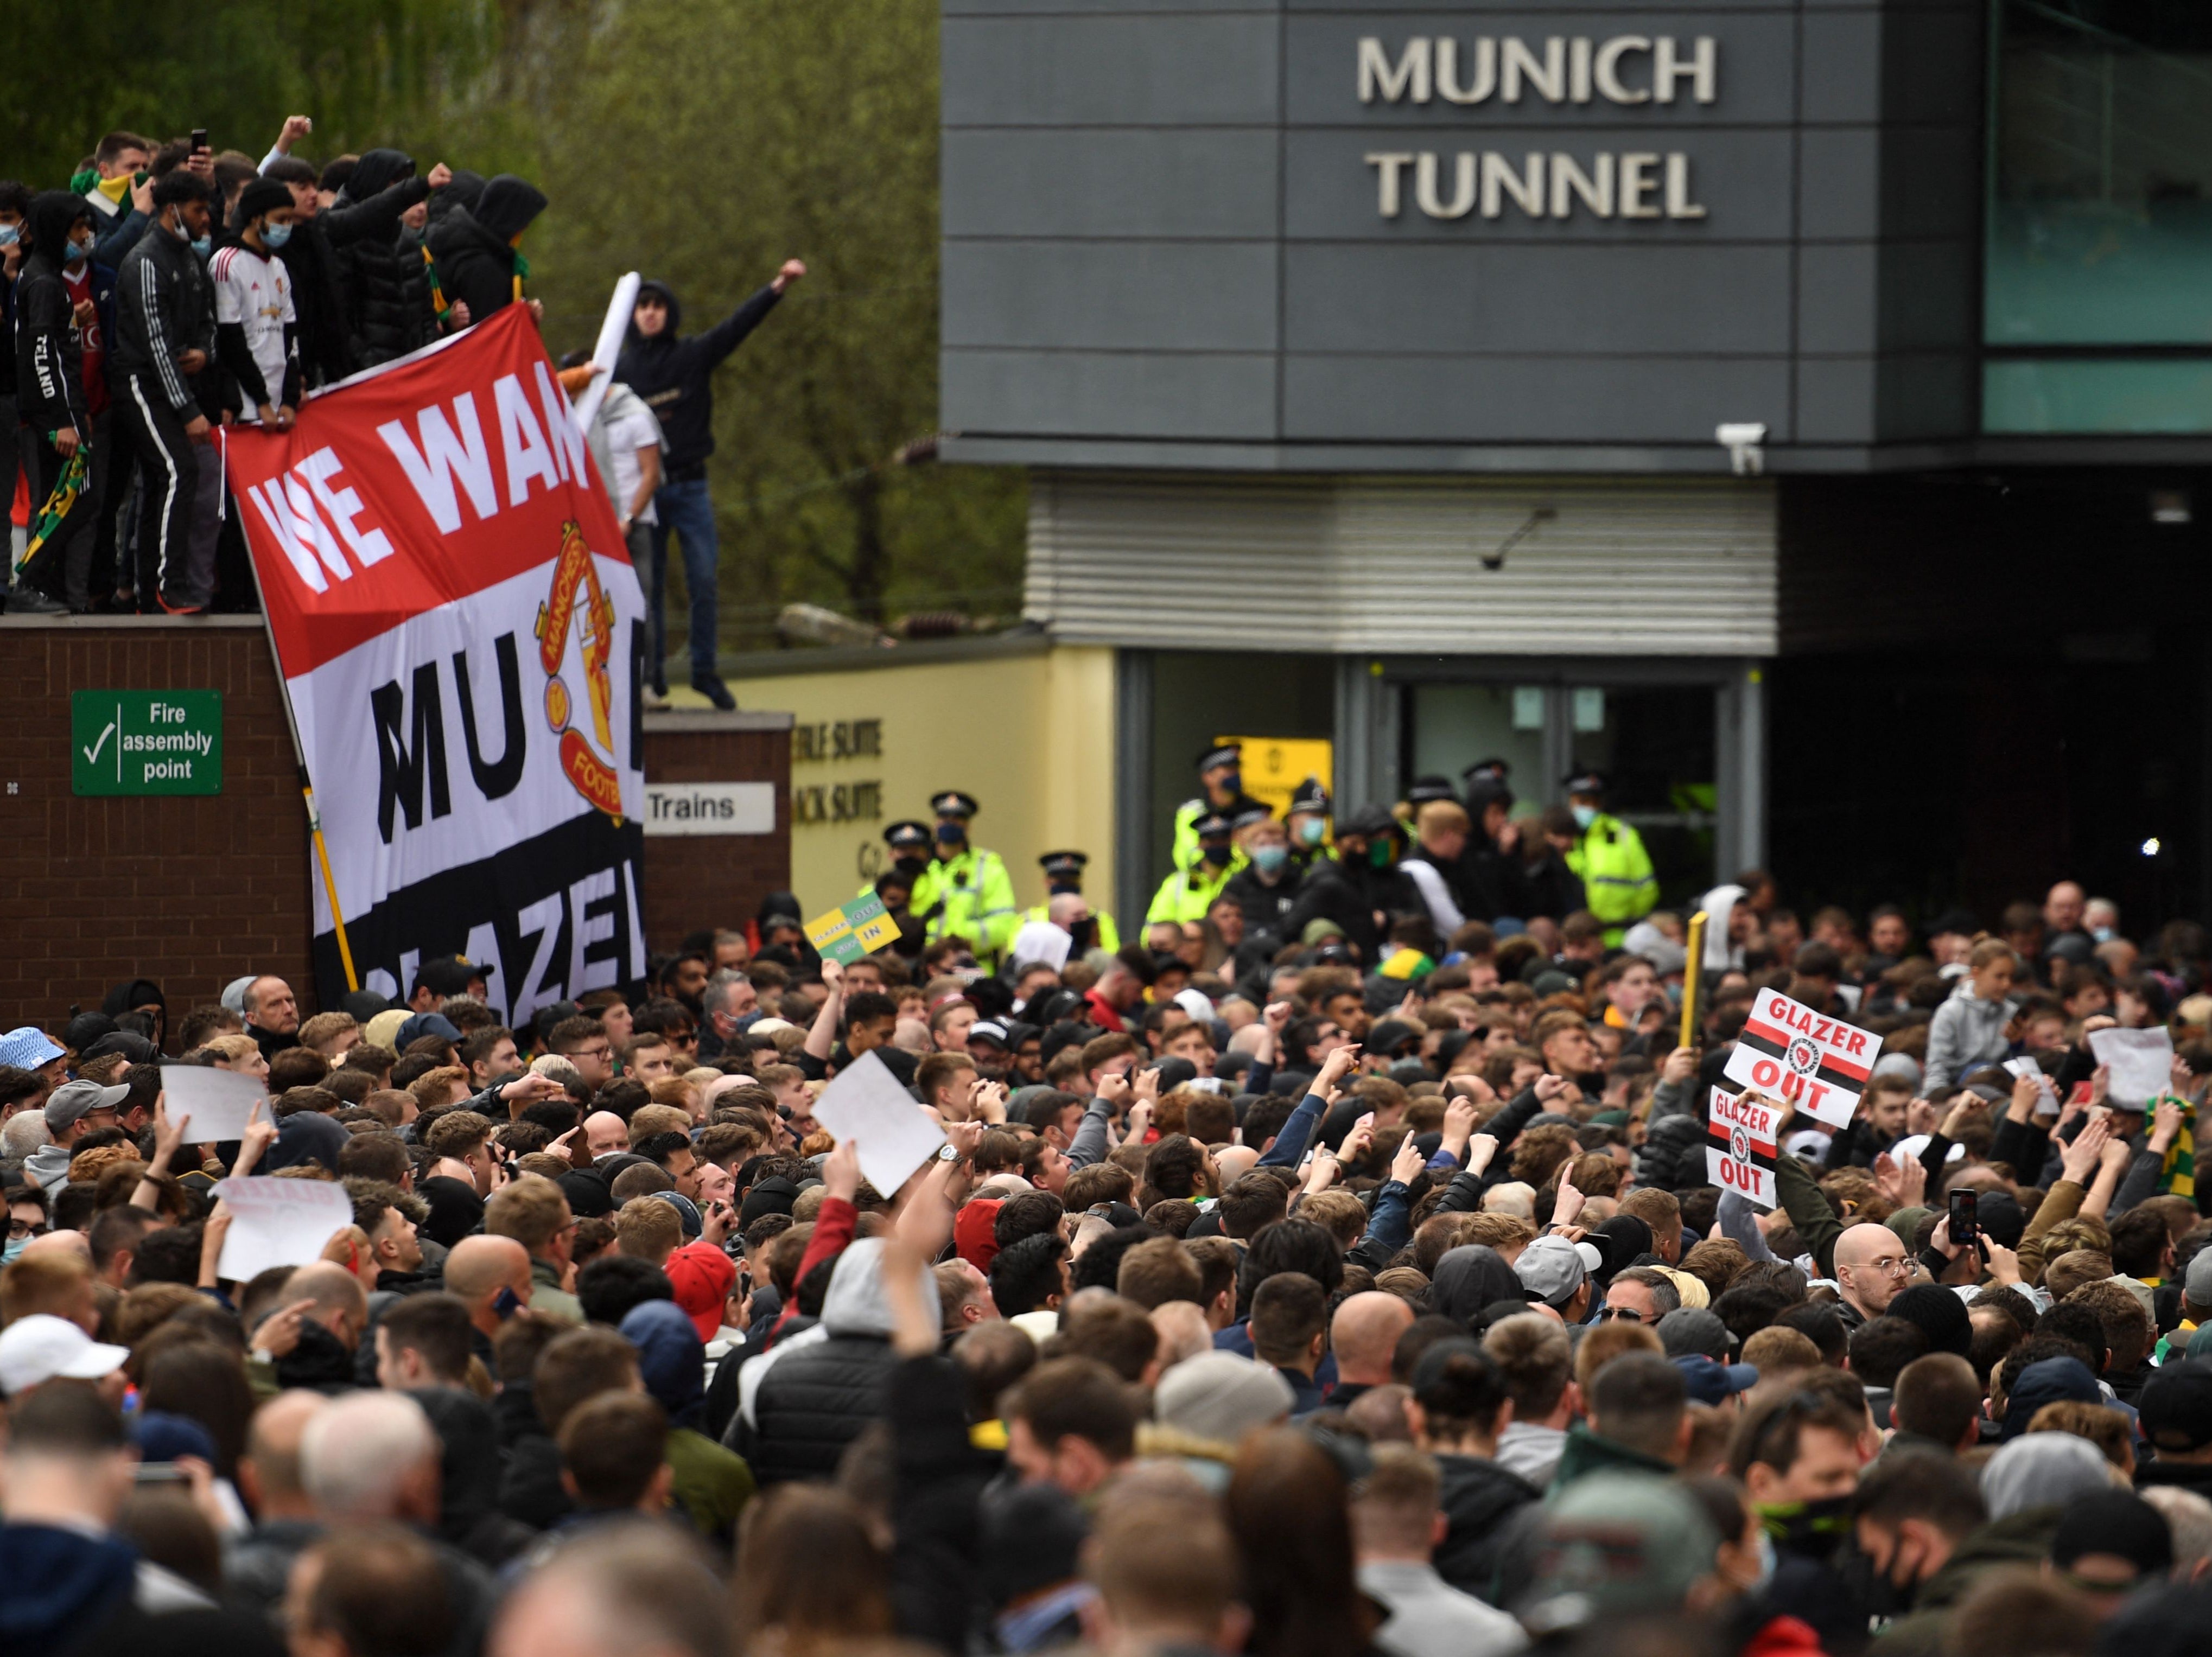 Thousands of United fans gathered outside Old Trafford, with hundreds taking to the pitch